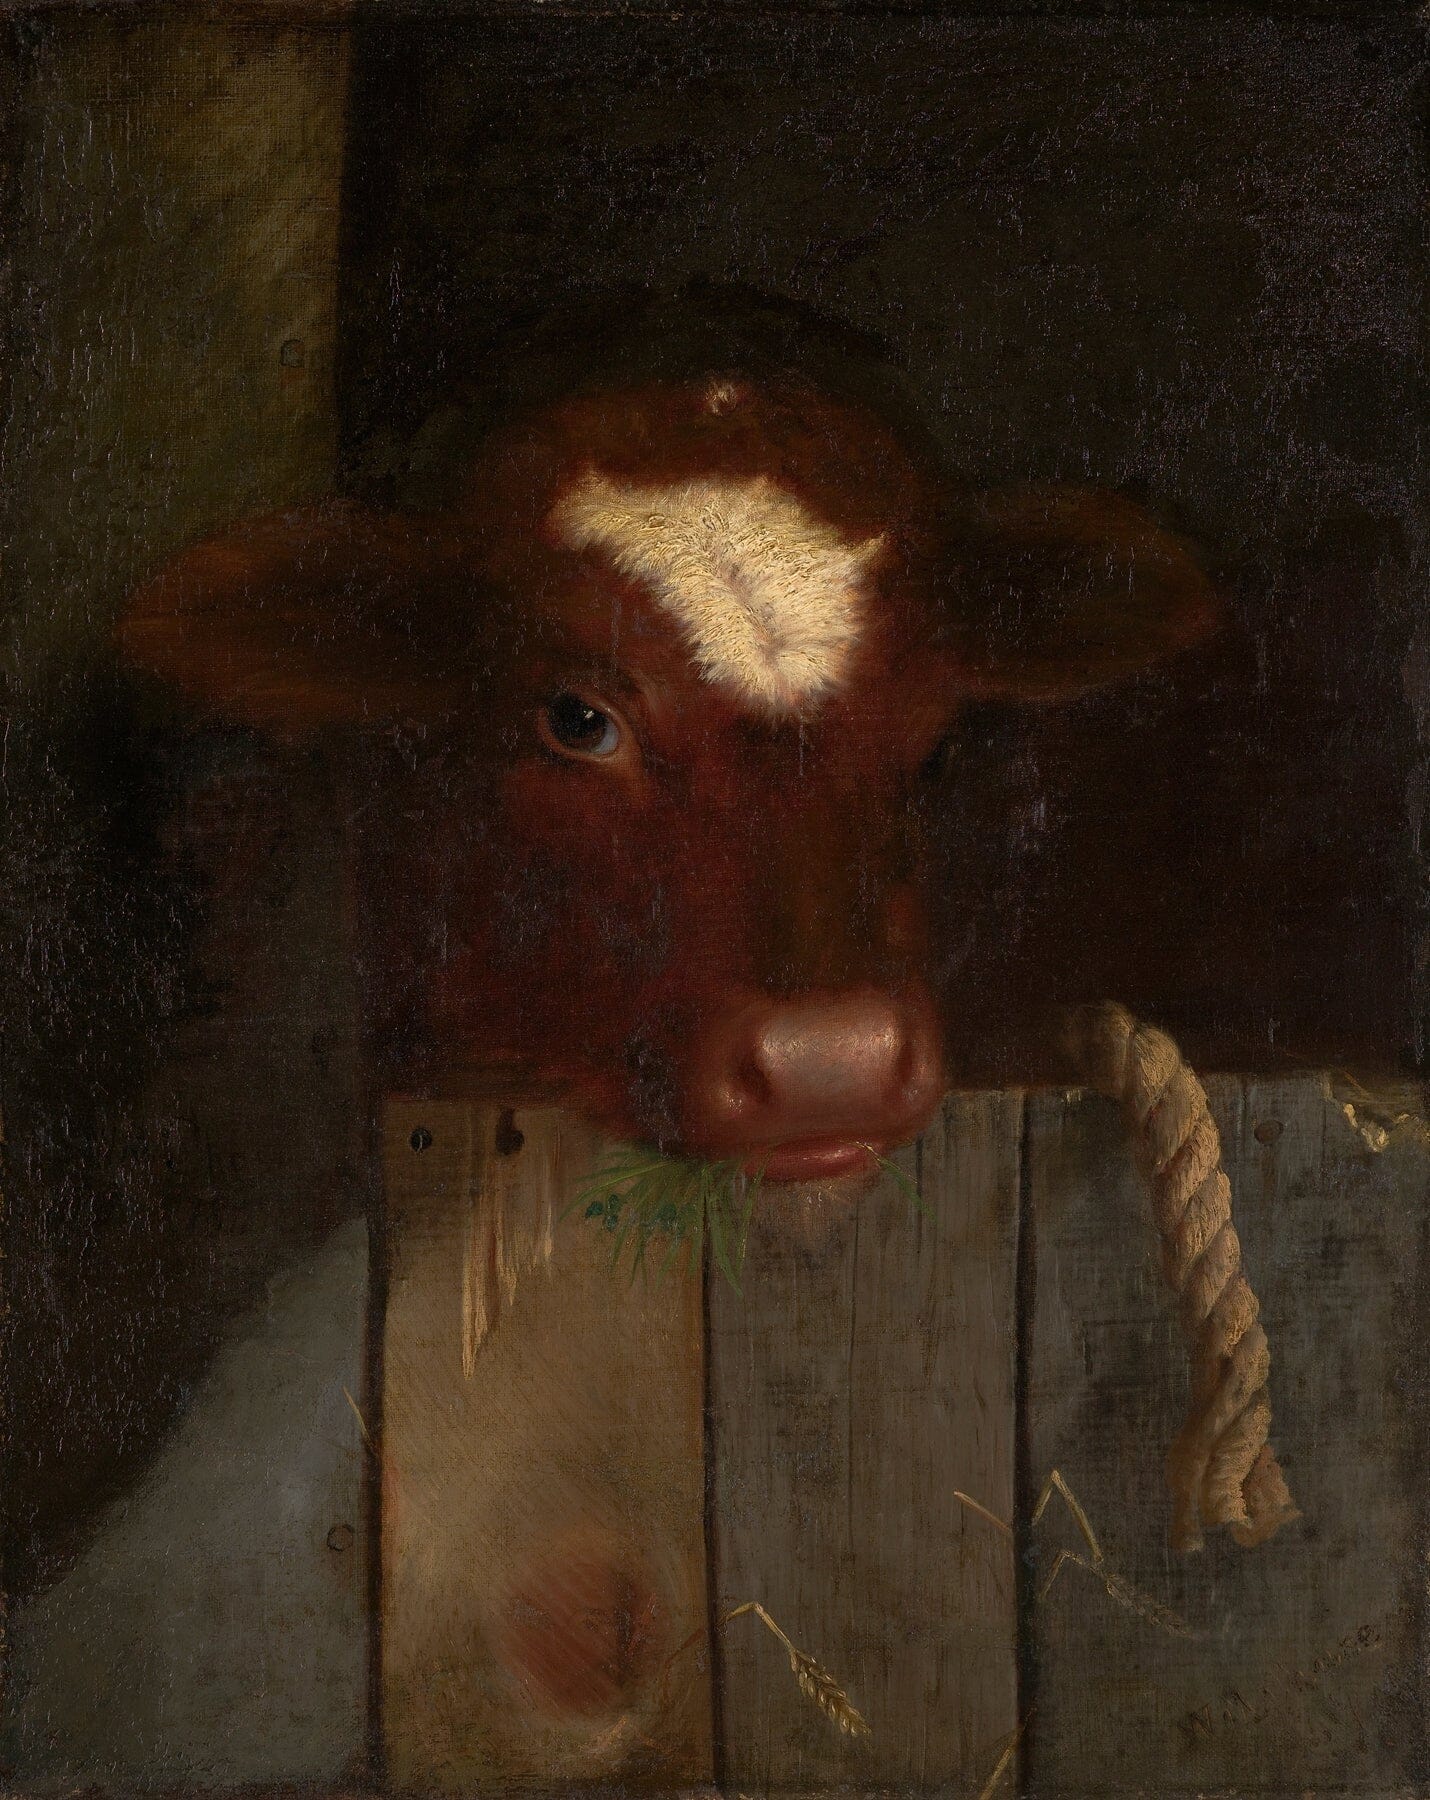 The Family Cow (1800s) | Vintage animal art prints | William Merritt Chase Posters, Prints, & Visual Artwork The Trumpet Shop   